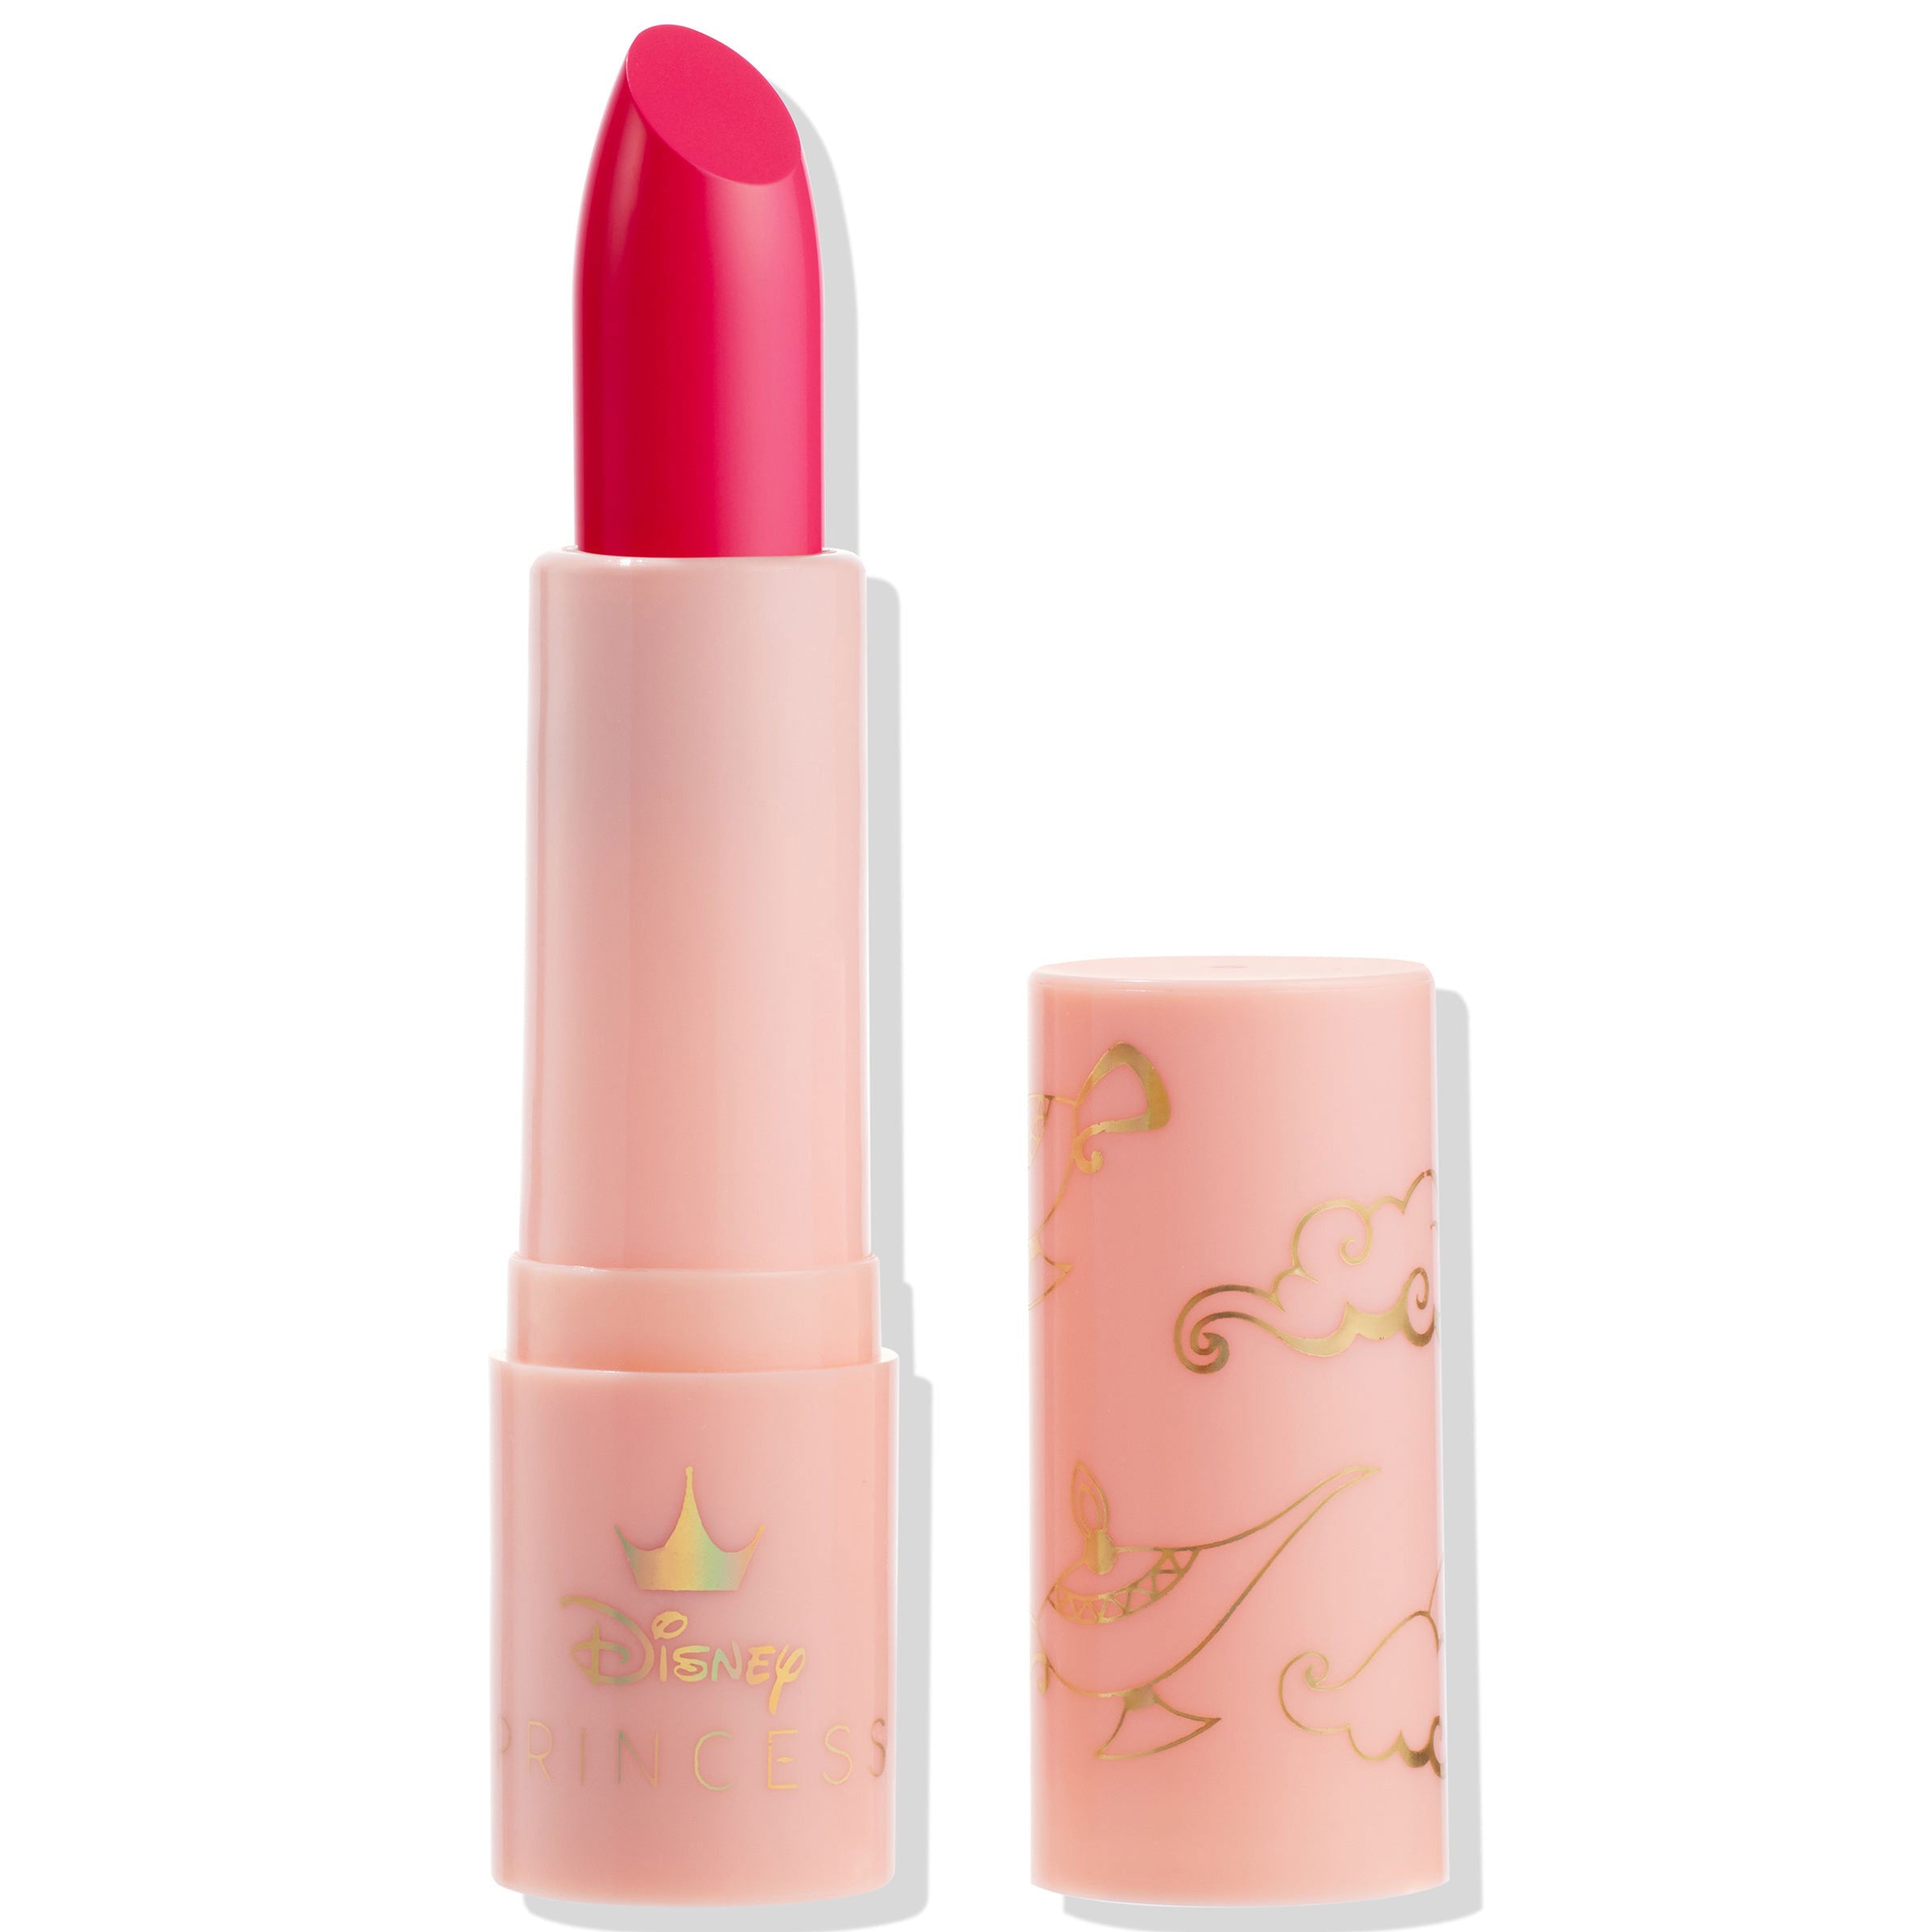 Colourpop Disney lux lipstick in Jasmine - A vibrant pink shade that’s hotter than hot 🔥